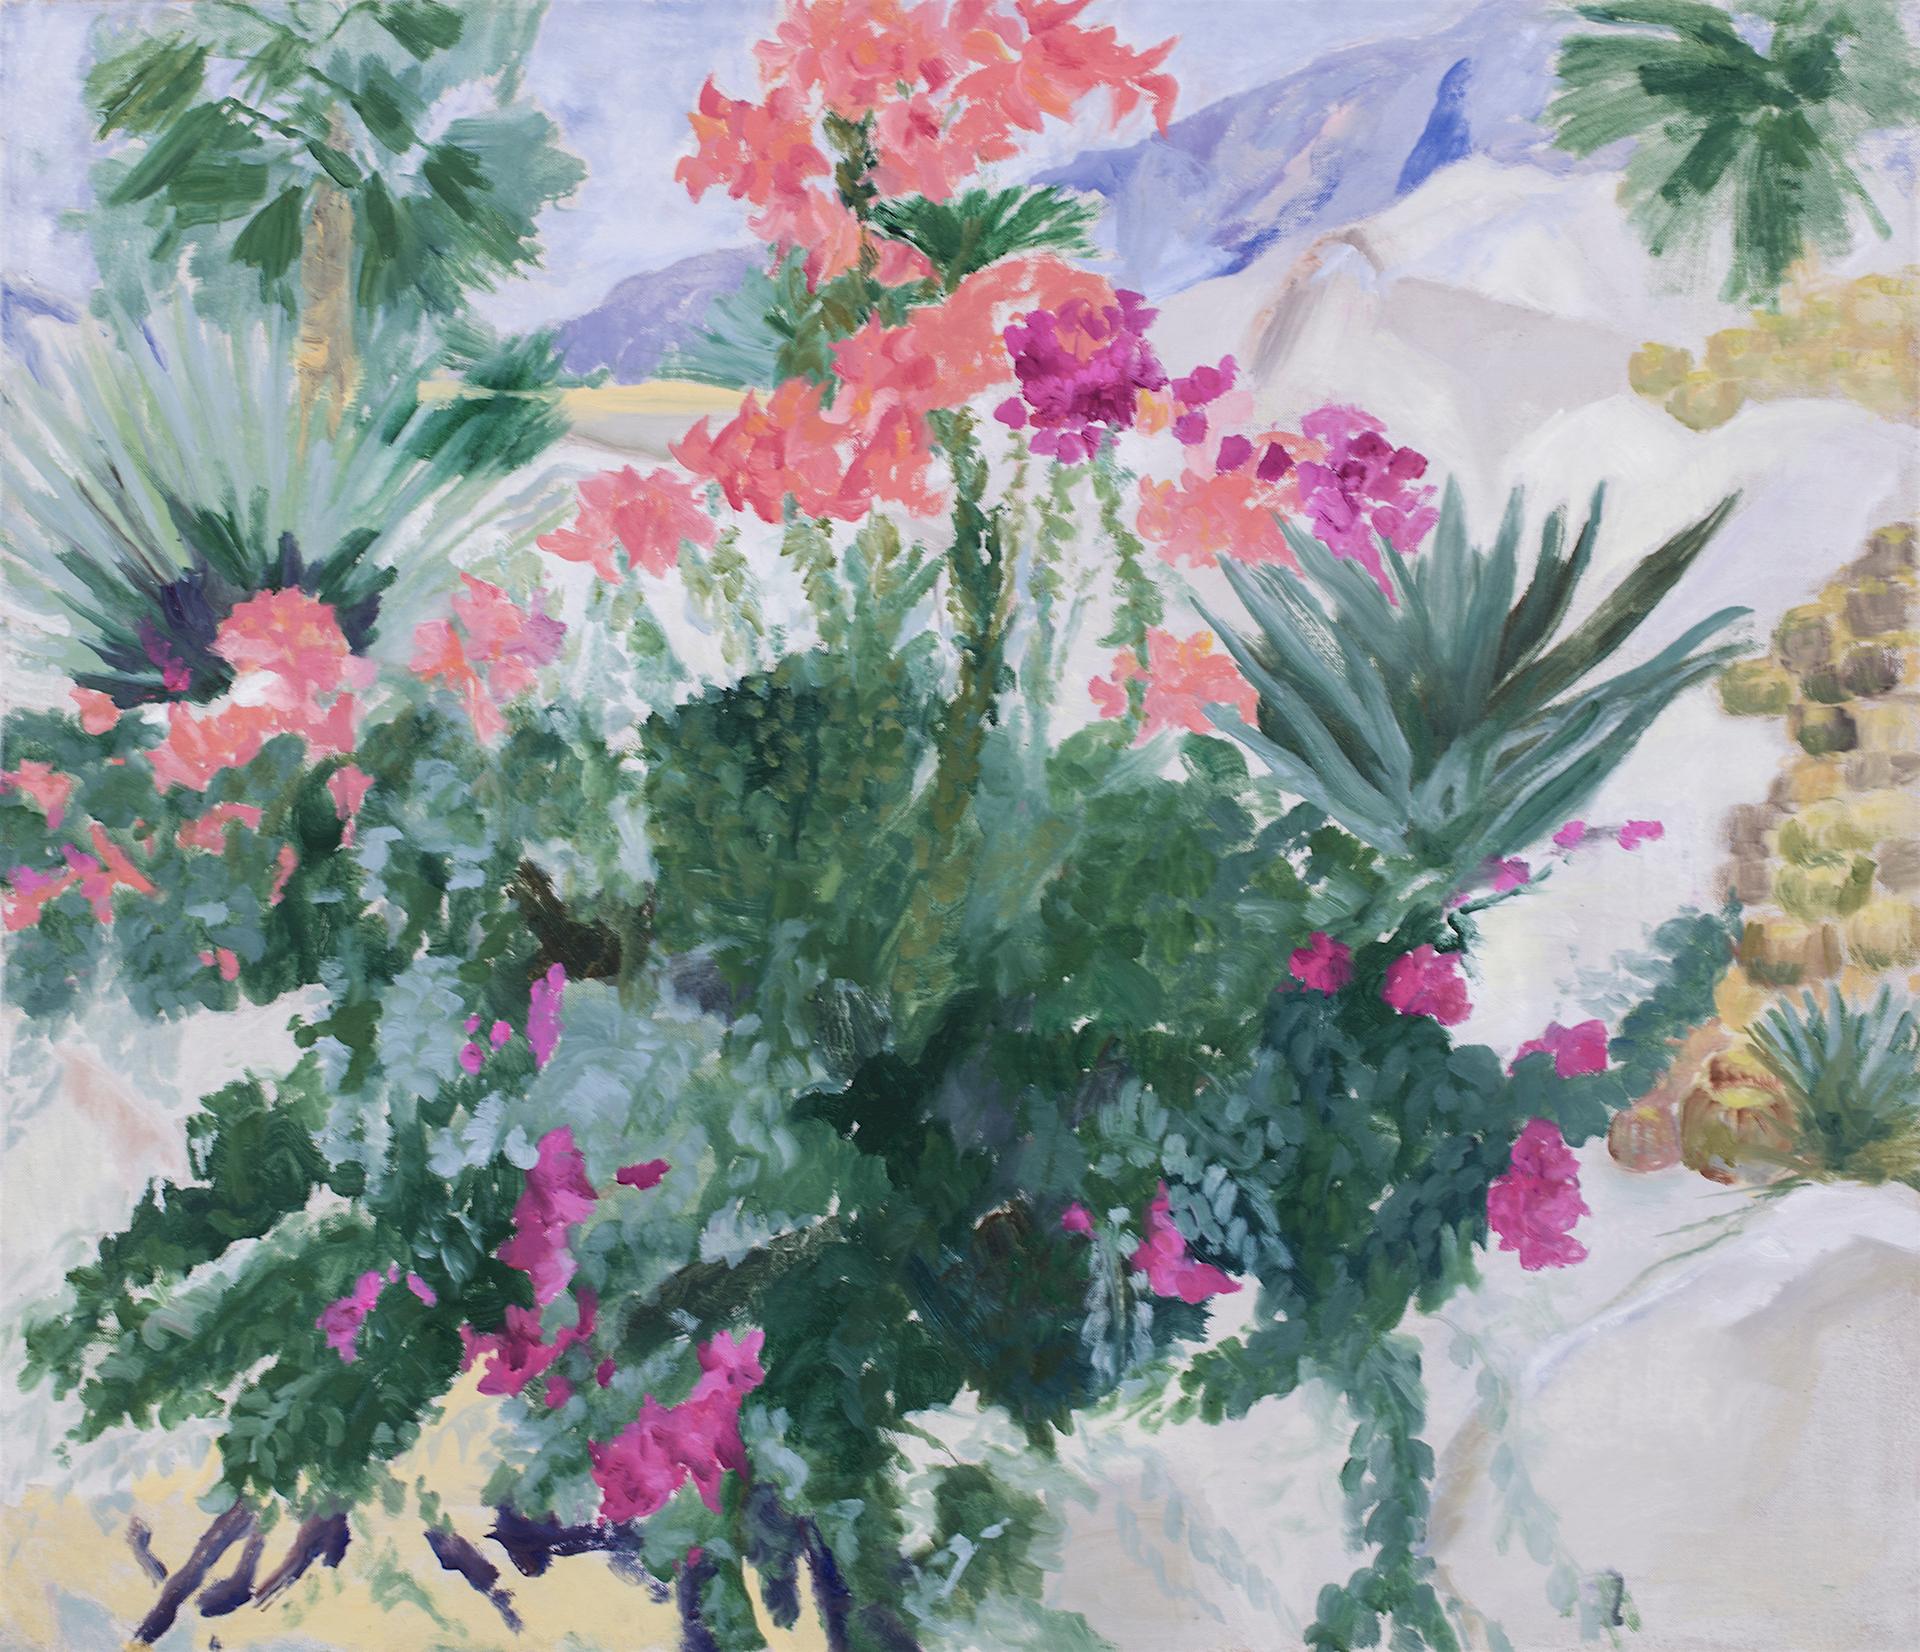 Contemporary Oil Mexican Landscape and  Pink Bougainvillea and Green Agave

This was the last painting that I did in the San José del Cabo residence. I was set up in the Wirikuta Garden on a clear, warm day with hot wind made the colors bright.  The